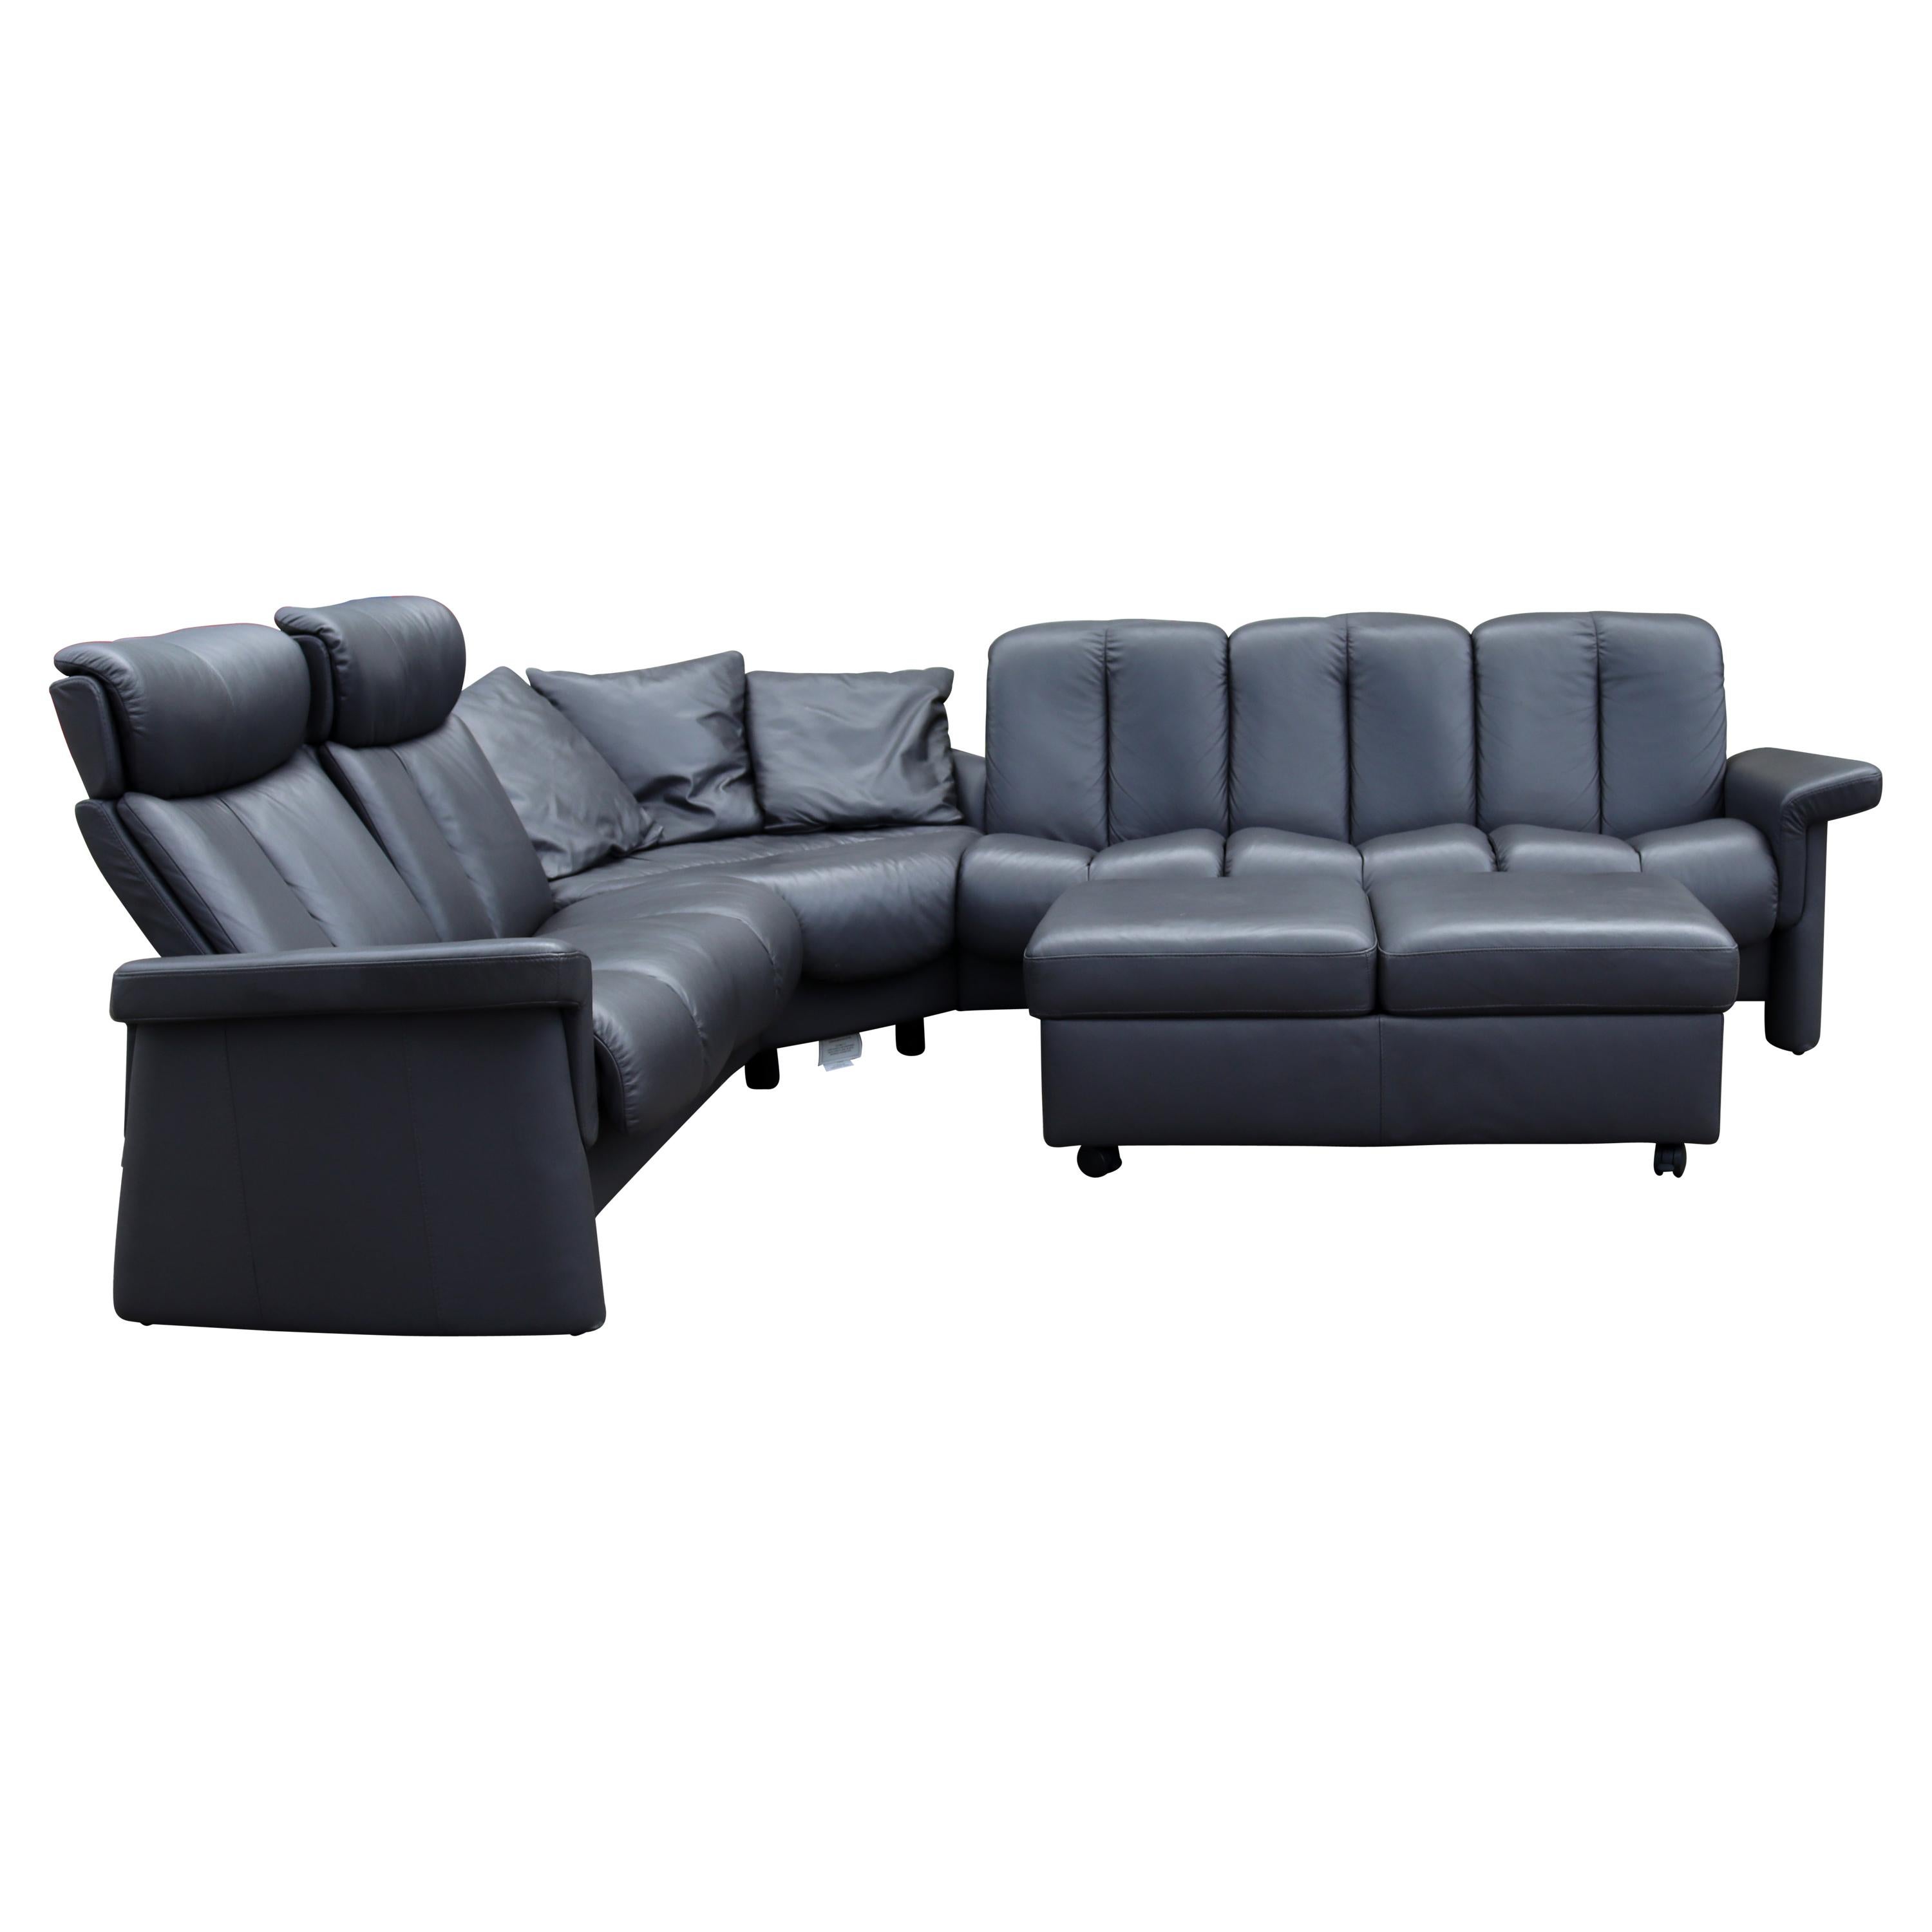 Contemporary Modernist Ekornes L Shaped Leather Sectional Sofa Norway w Ottoman